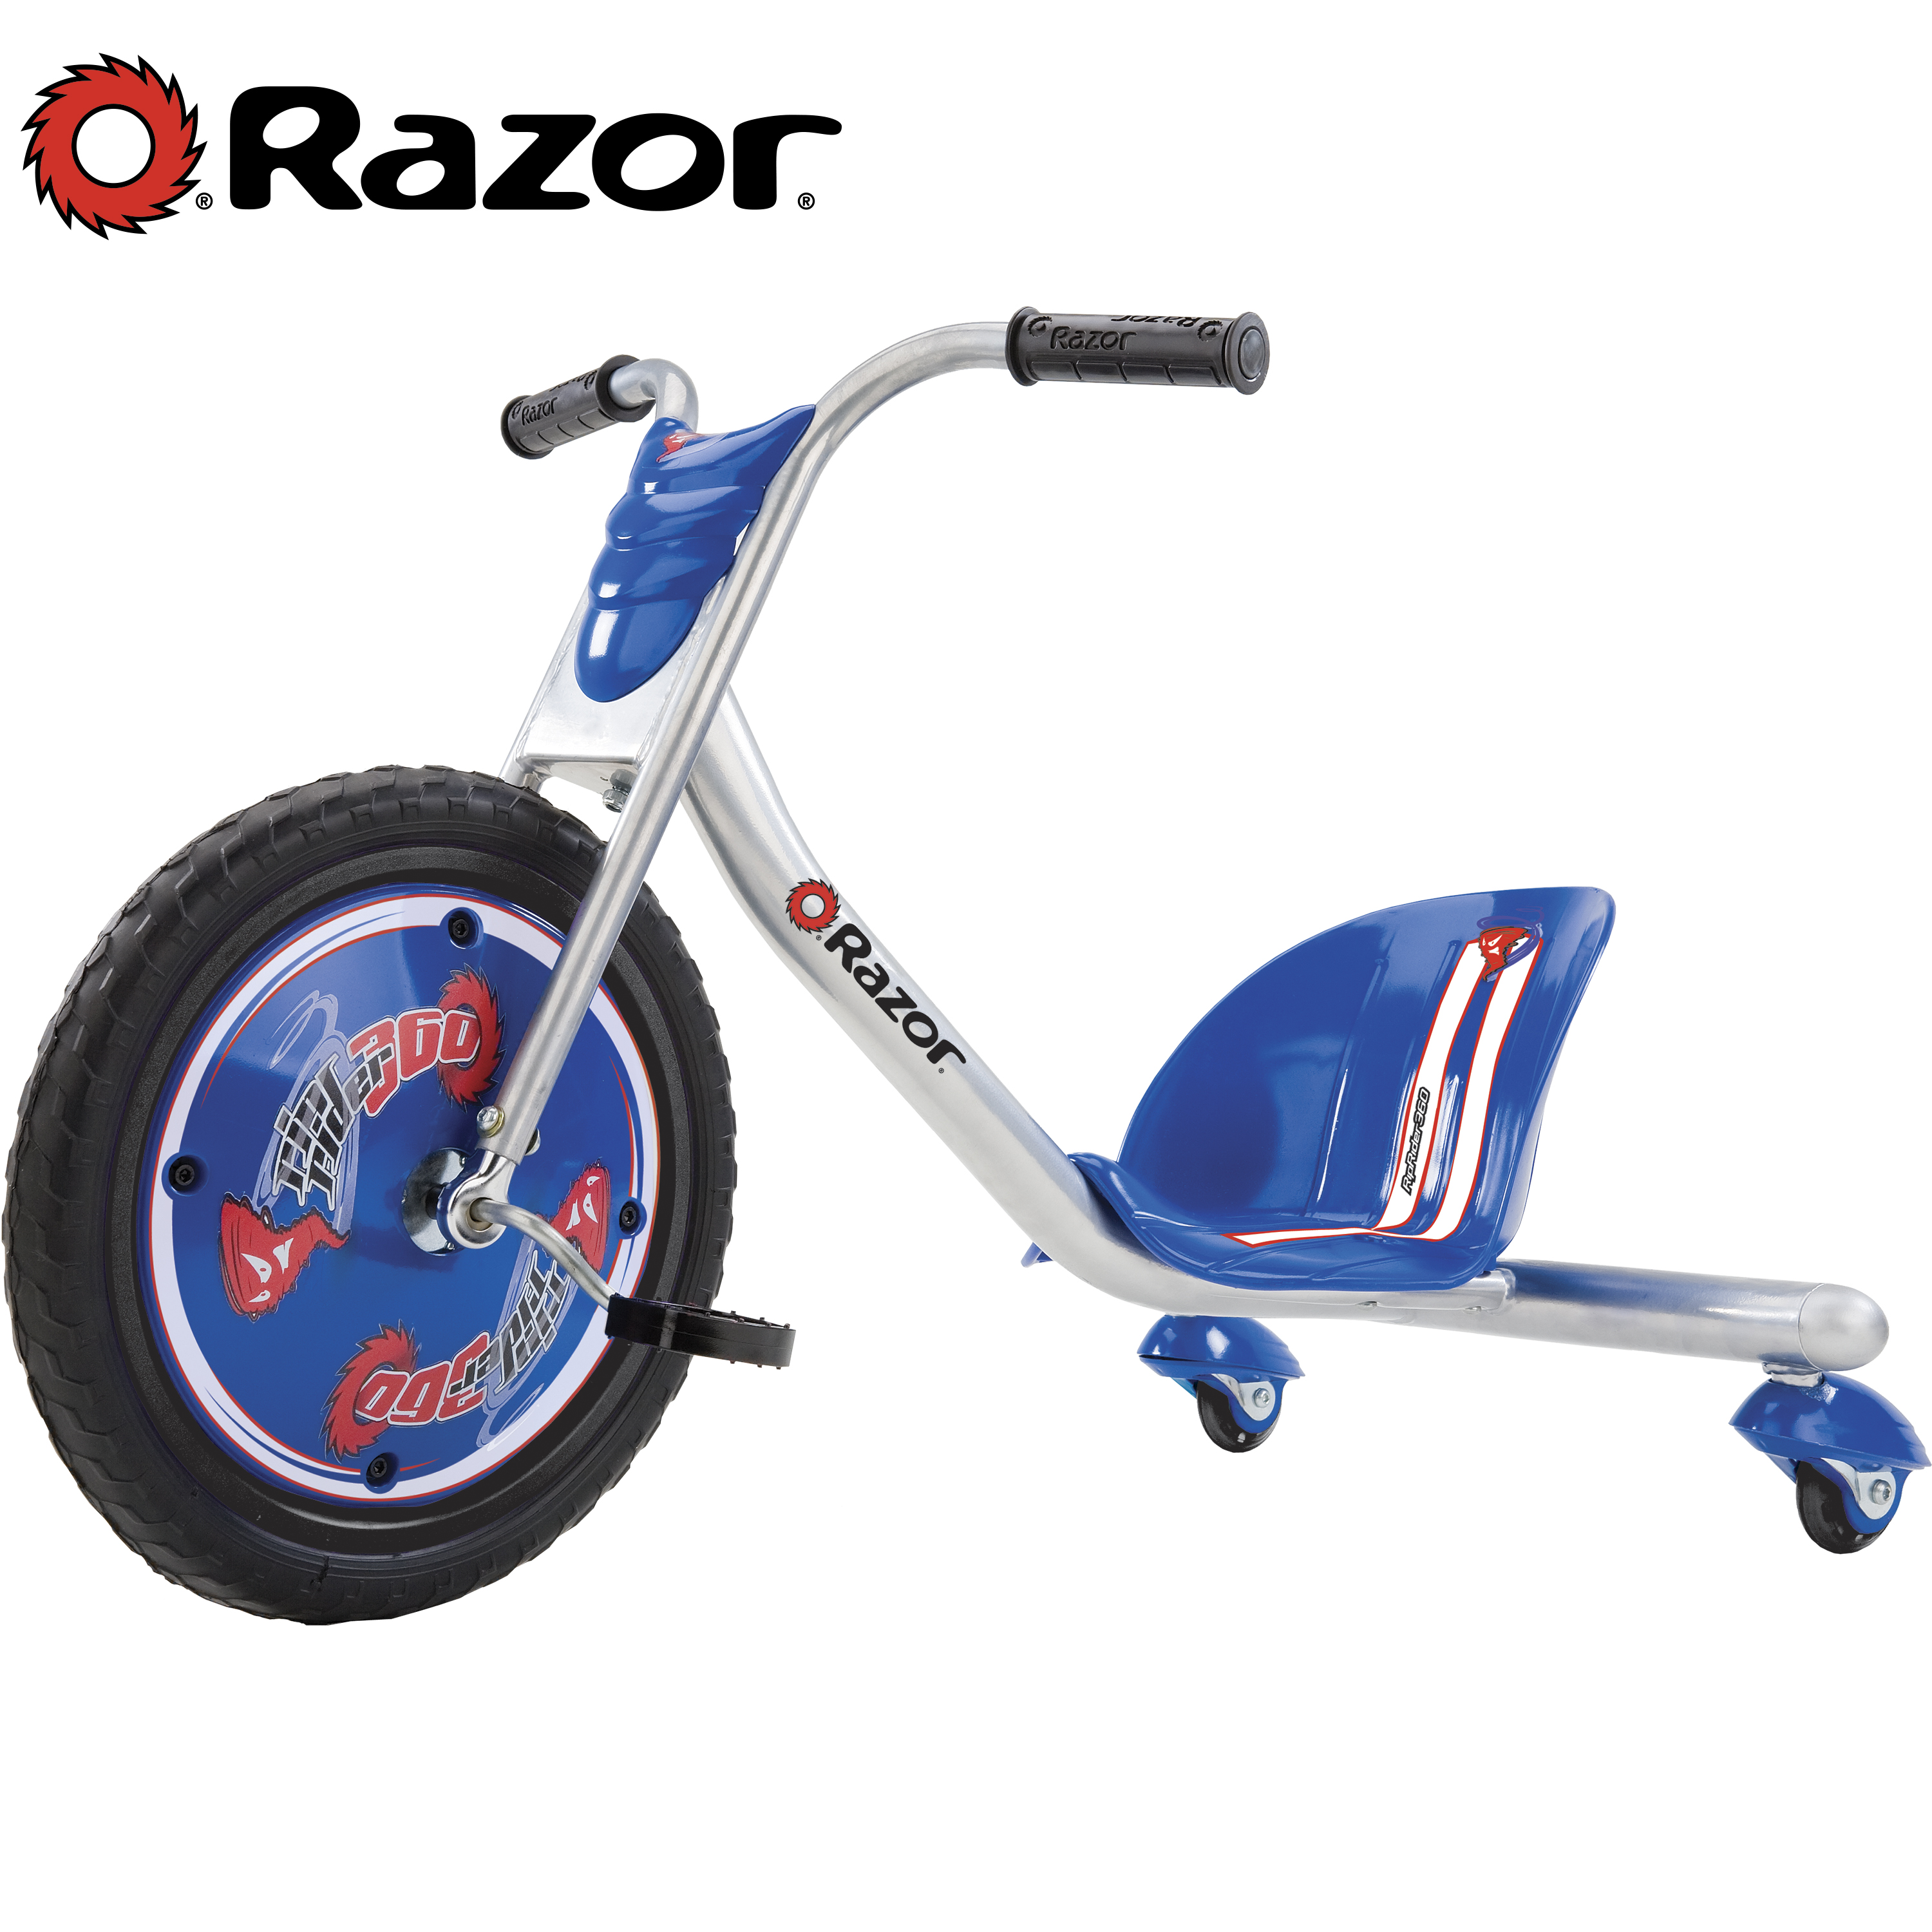 Razor RipRider 360 Drift Trike - Blue, 16" Front Wheel, 3-Wheeled Ride-on, Tricycle for Child 5+ - image 1 of 11